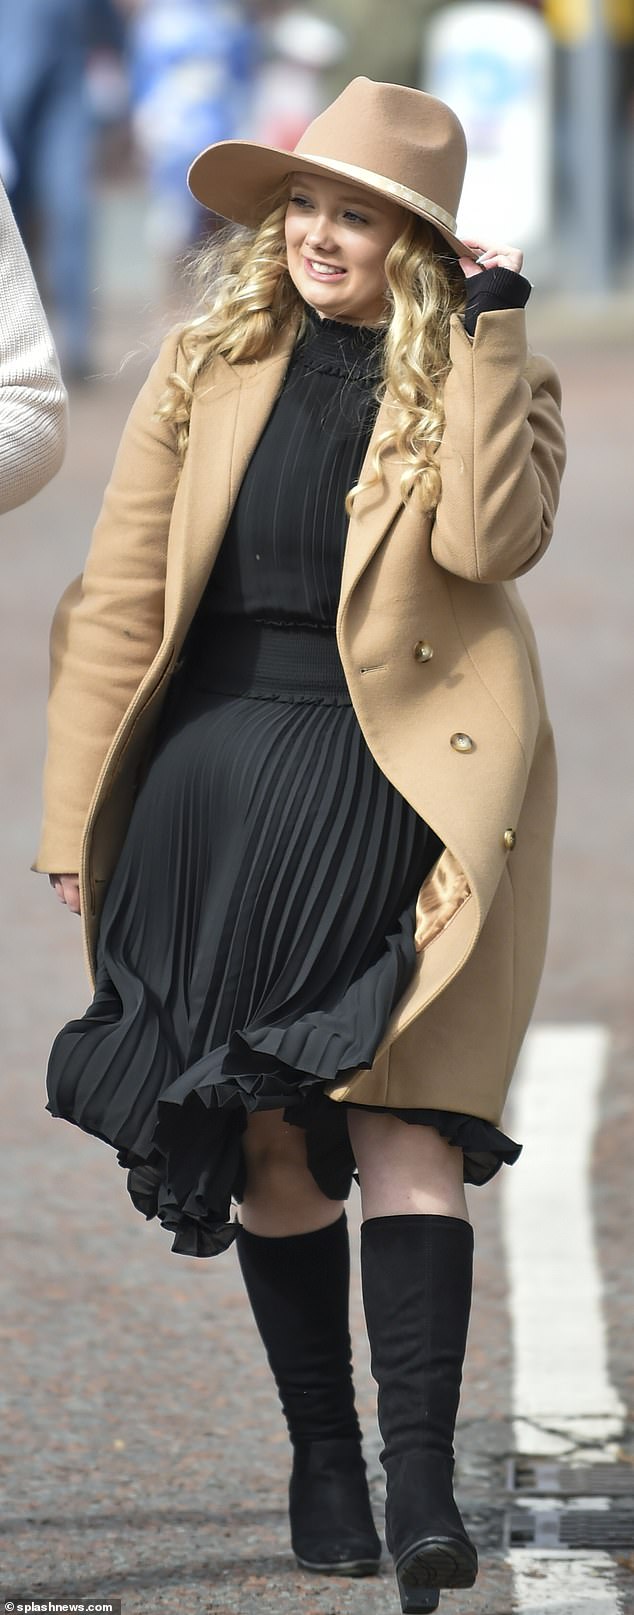 A classic combo: This woman opted for a black pleated dress and black knee-high boots which she paired with a camel coat and a camel hat